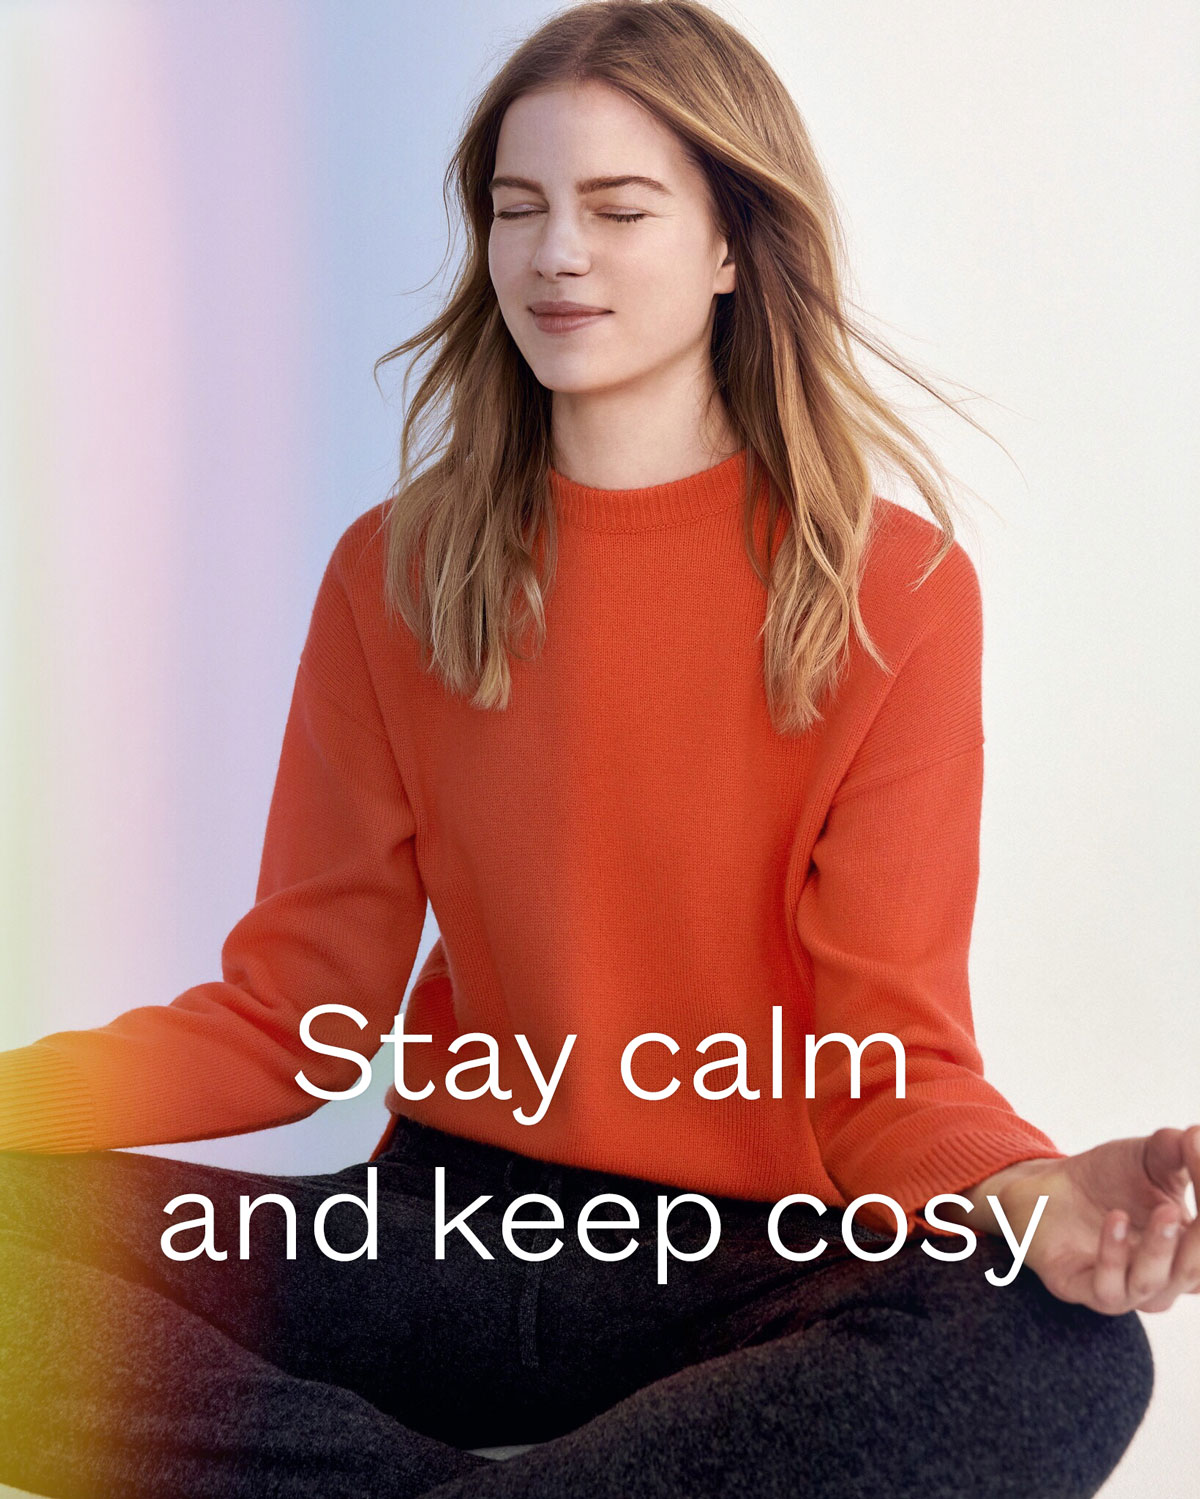 Stay calm and keep cosy